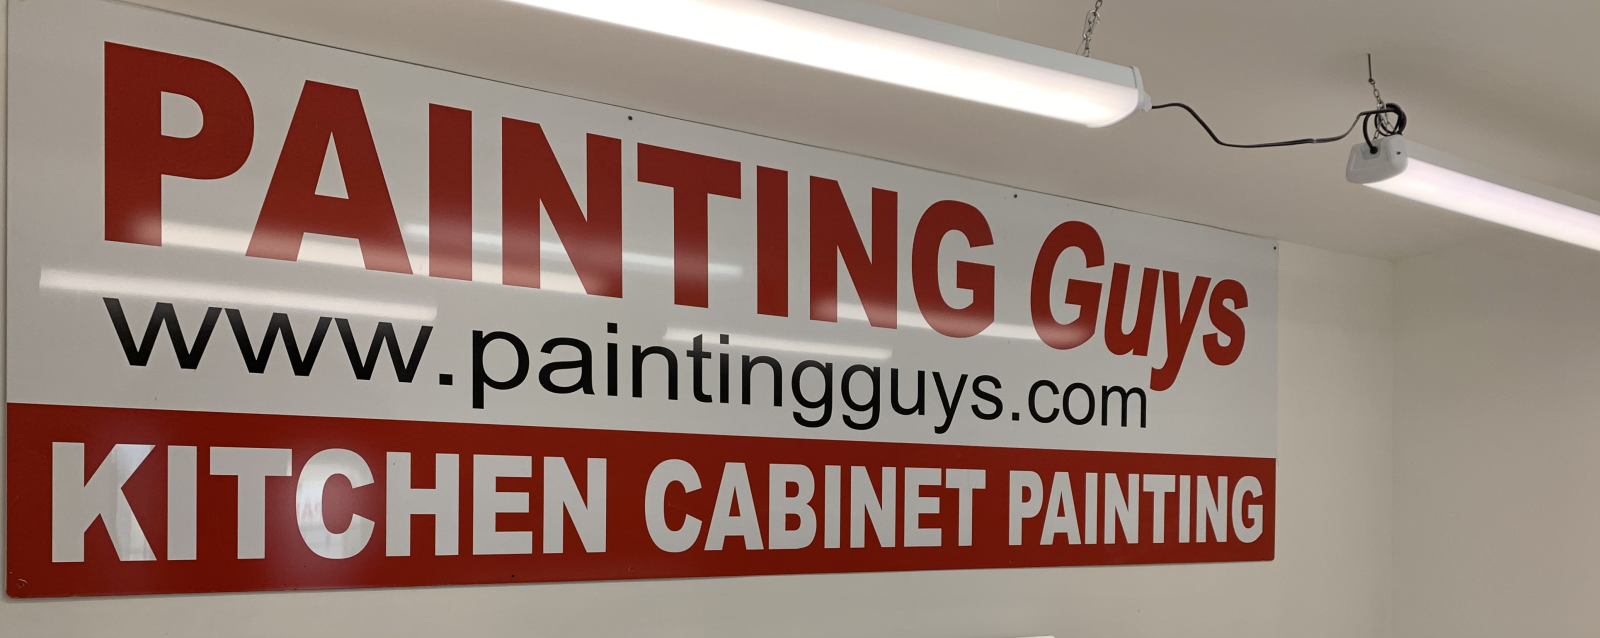 PAINTING Guys kitchen cabinet painting